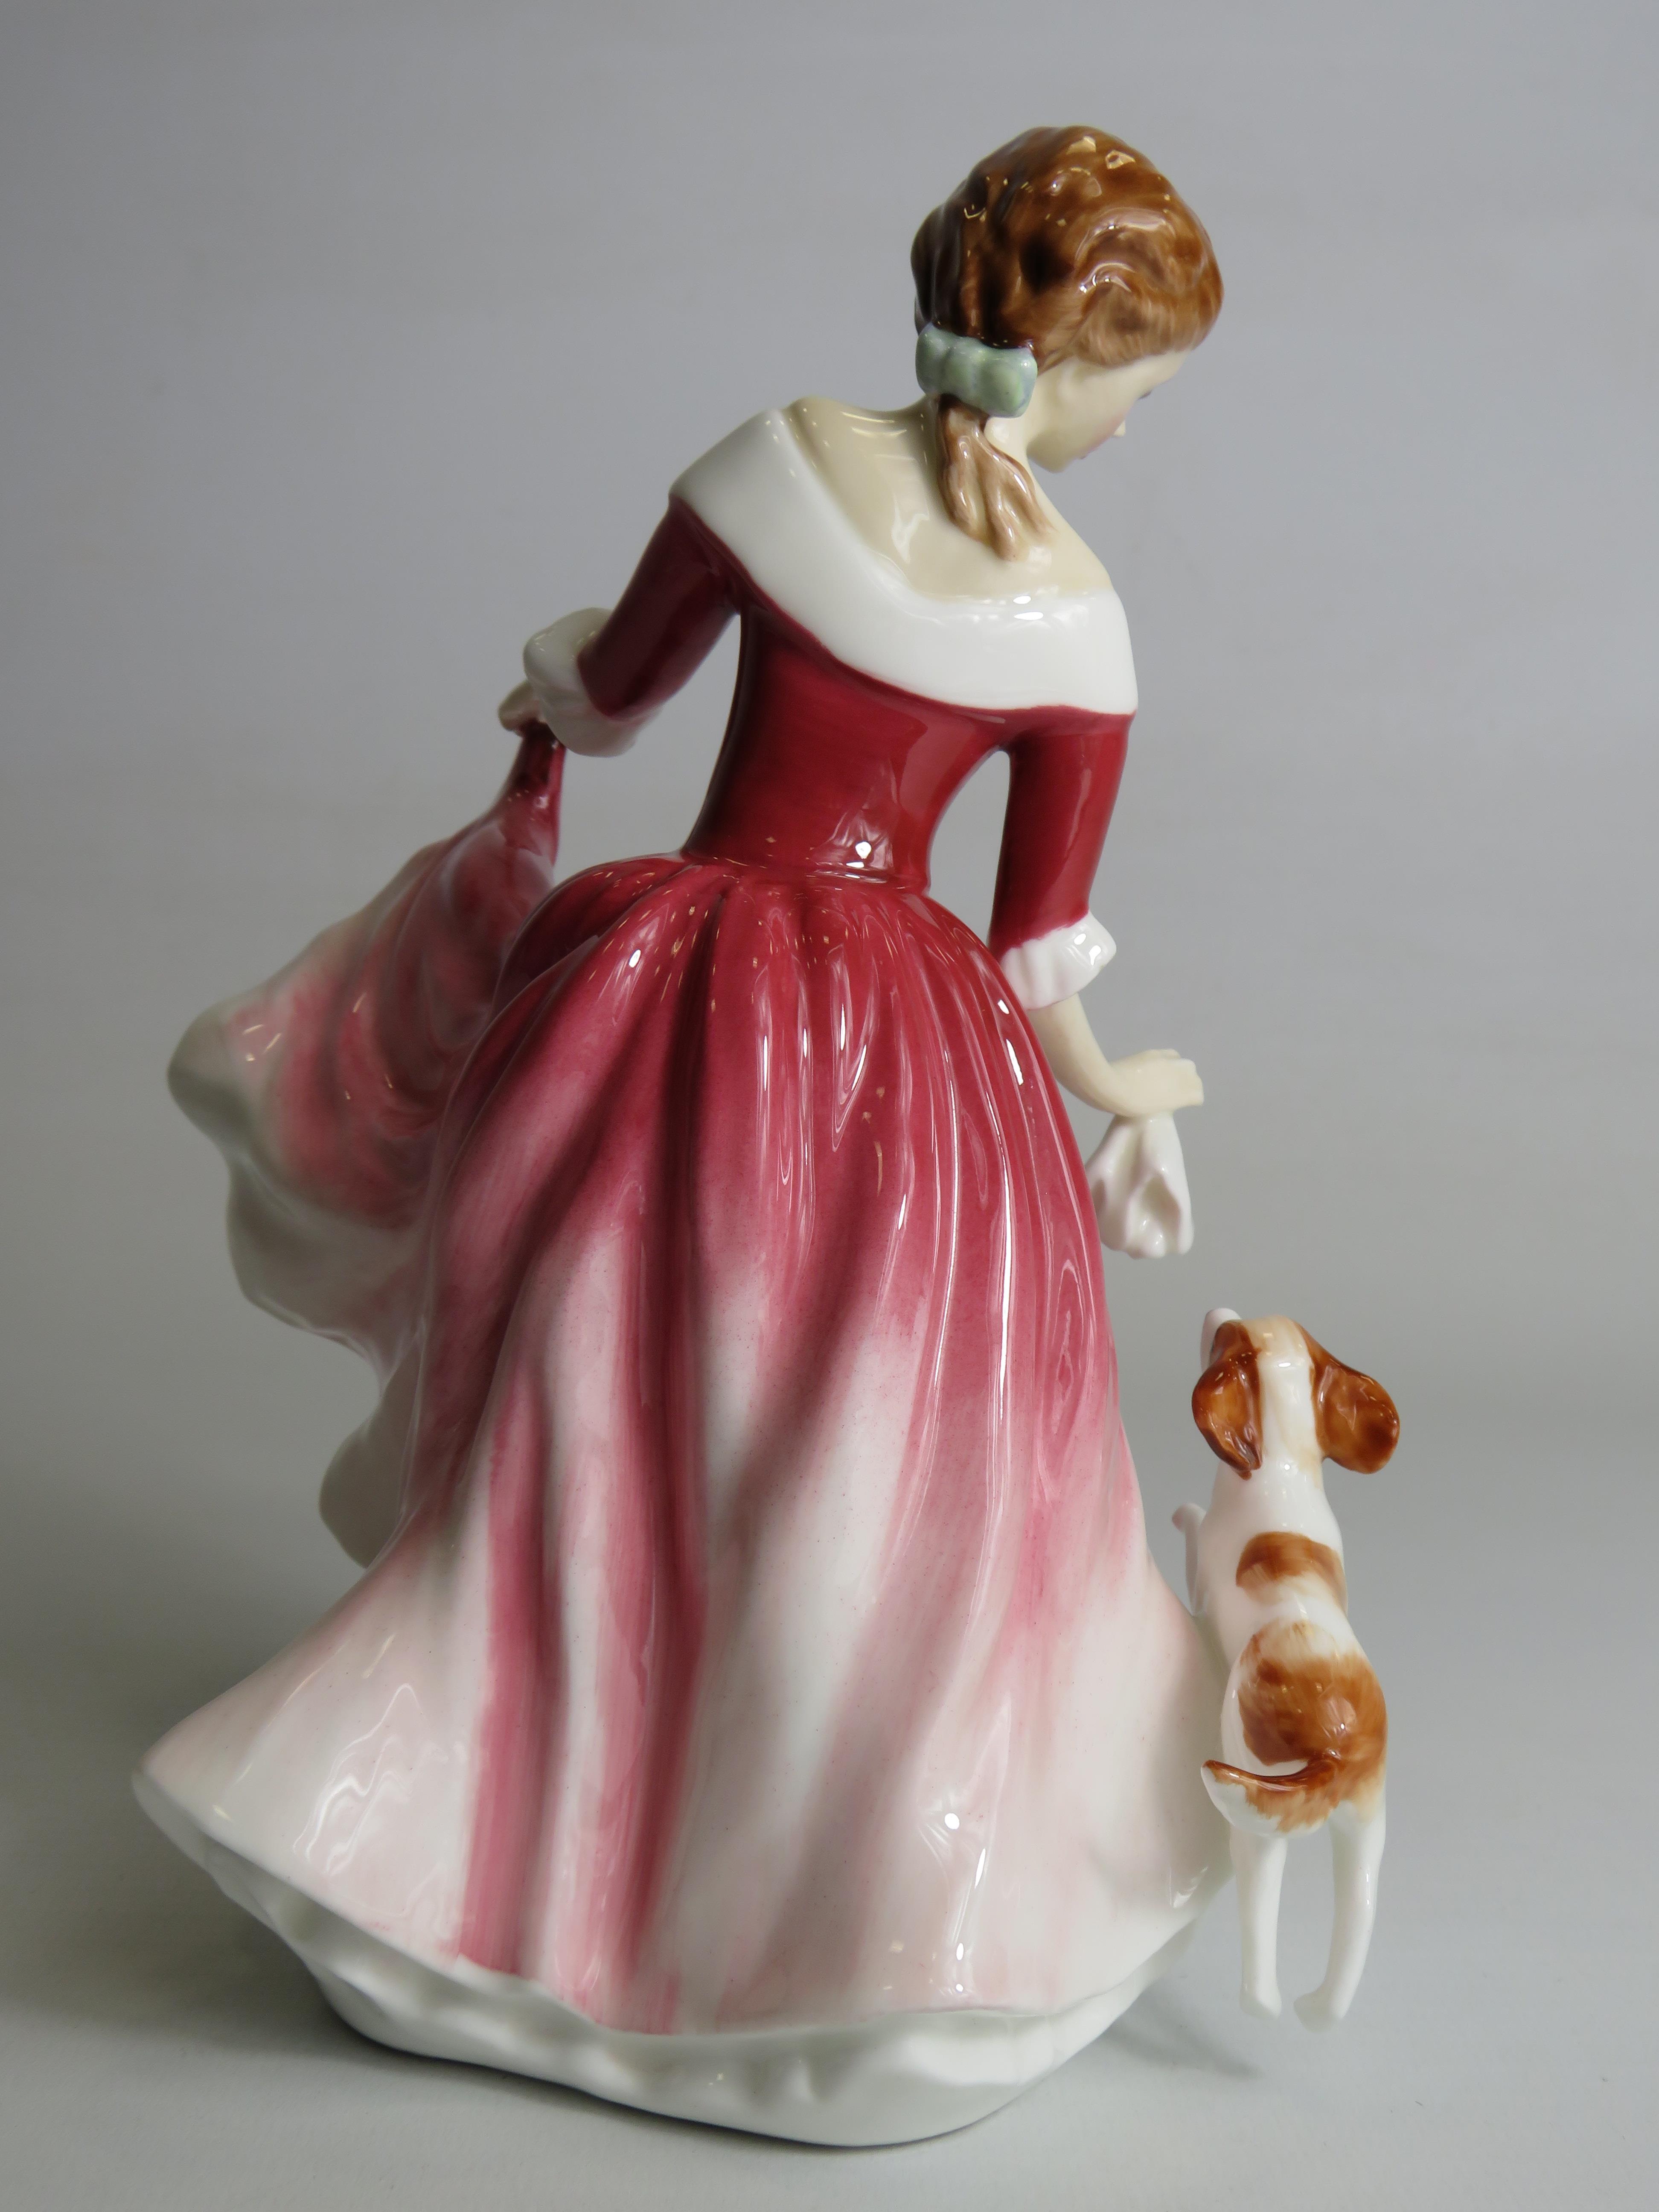 Royal Doulton Figurine My Best friend HN 3011, Approx 20cm tall. - Image 5 of 5